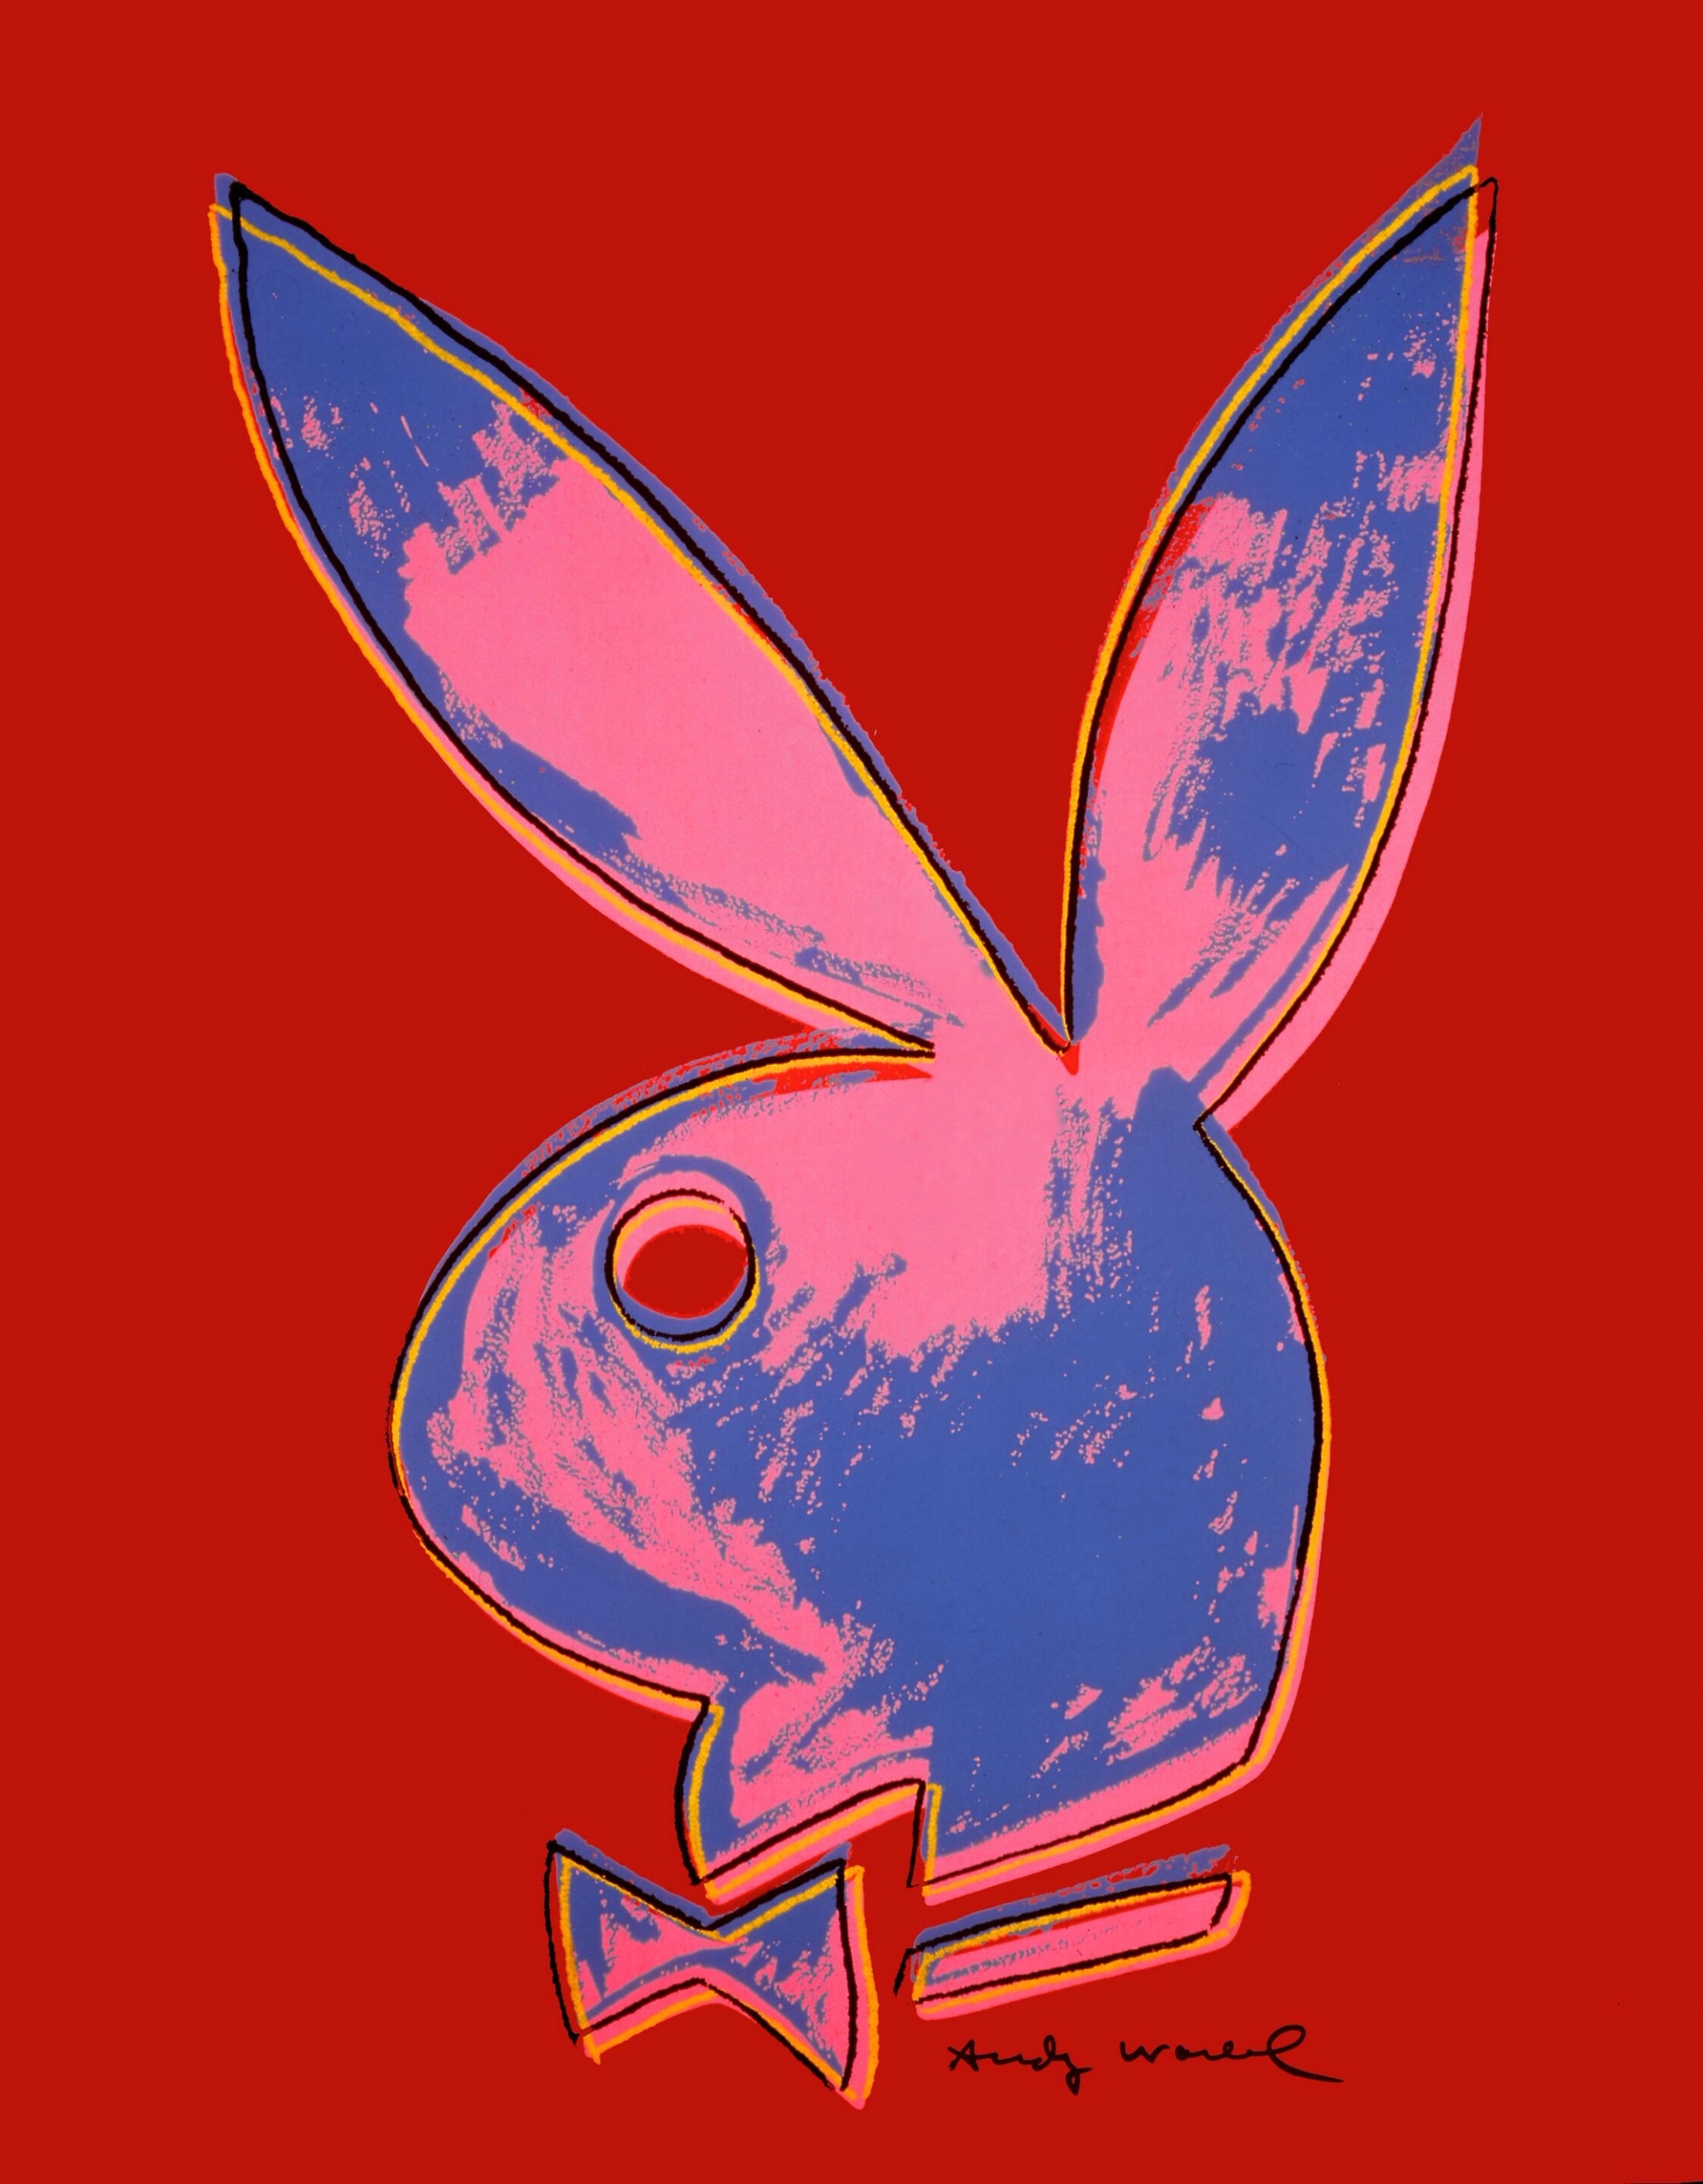 Andy Warhol, Cover for Playboy Anniversary Issue, January 1986